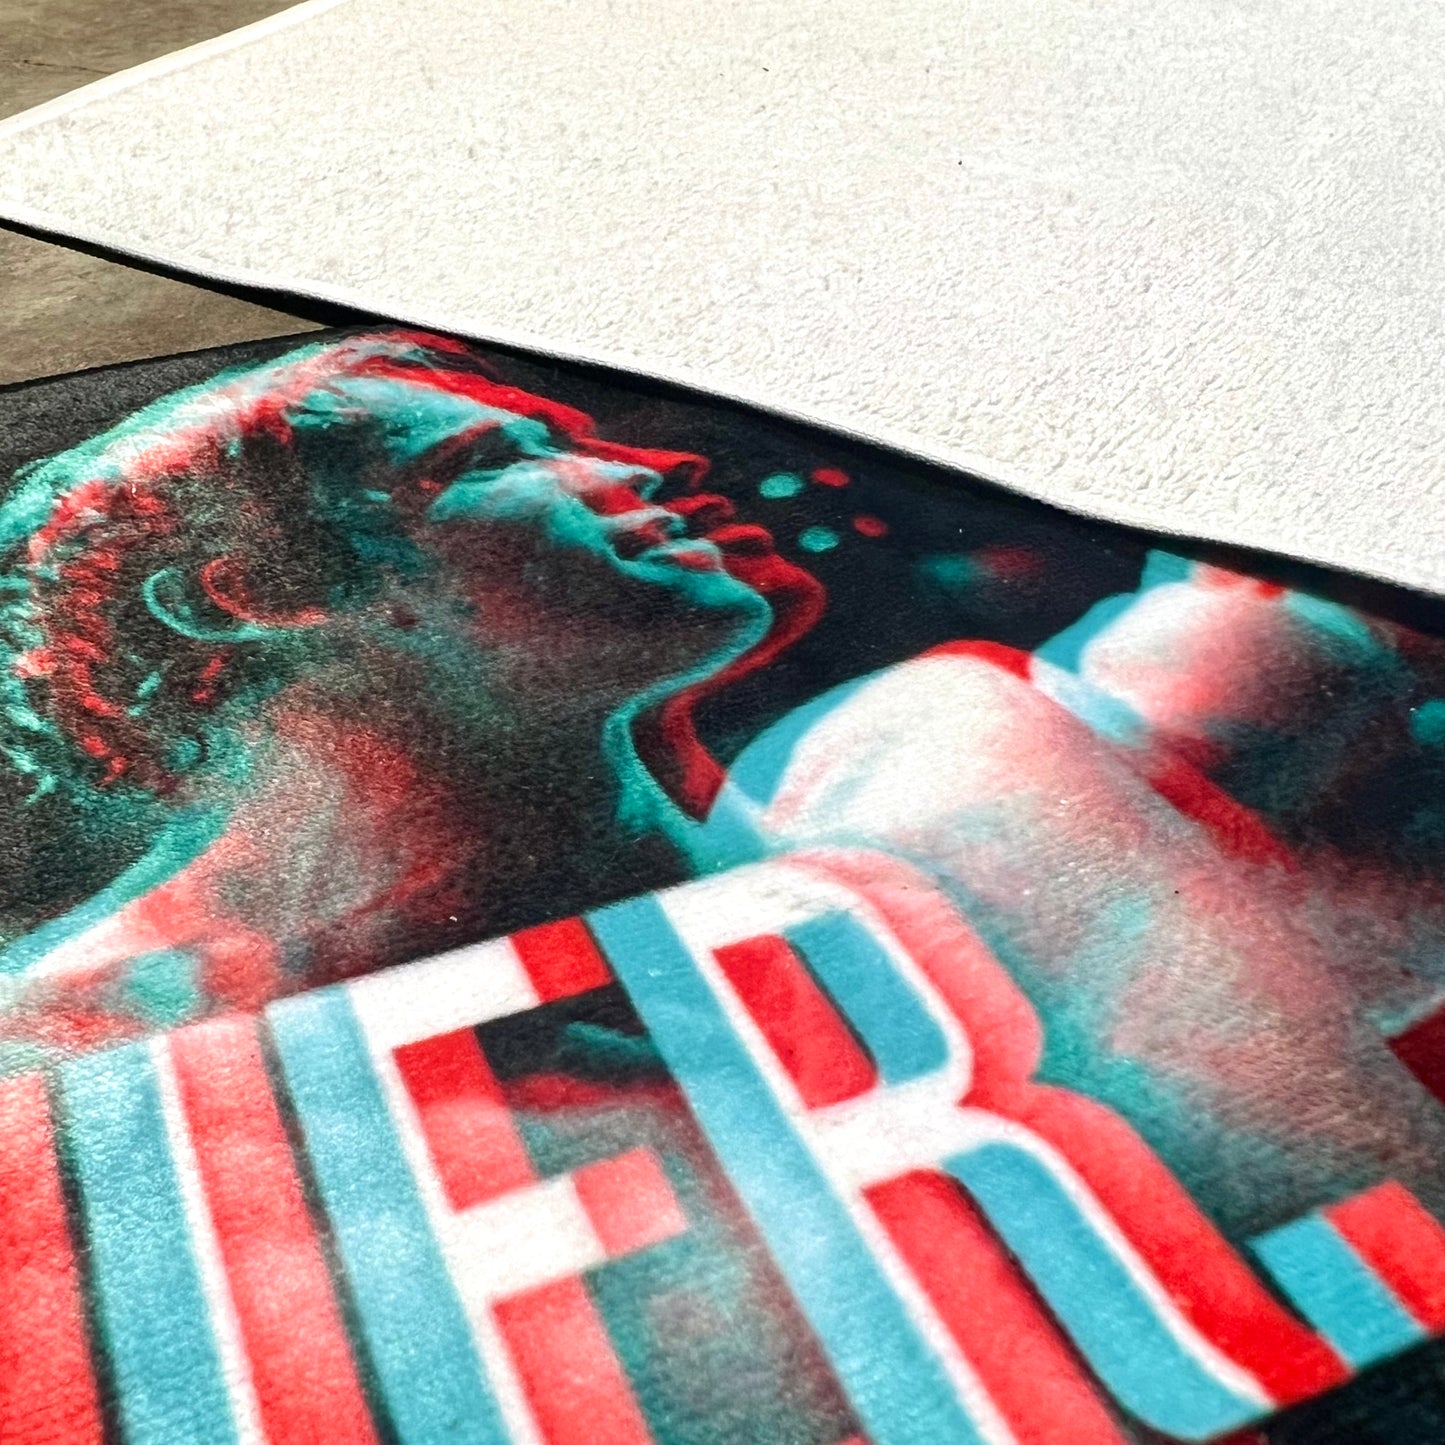 Conquer Customizable Gym Towel 11"x18"